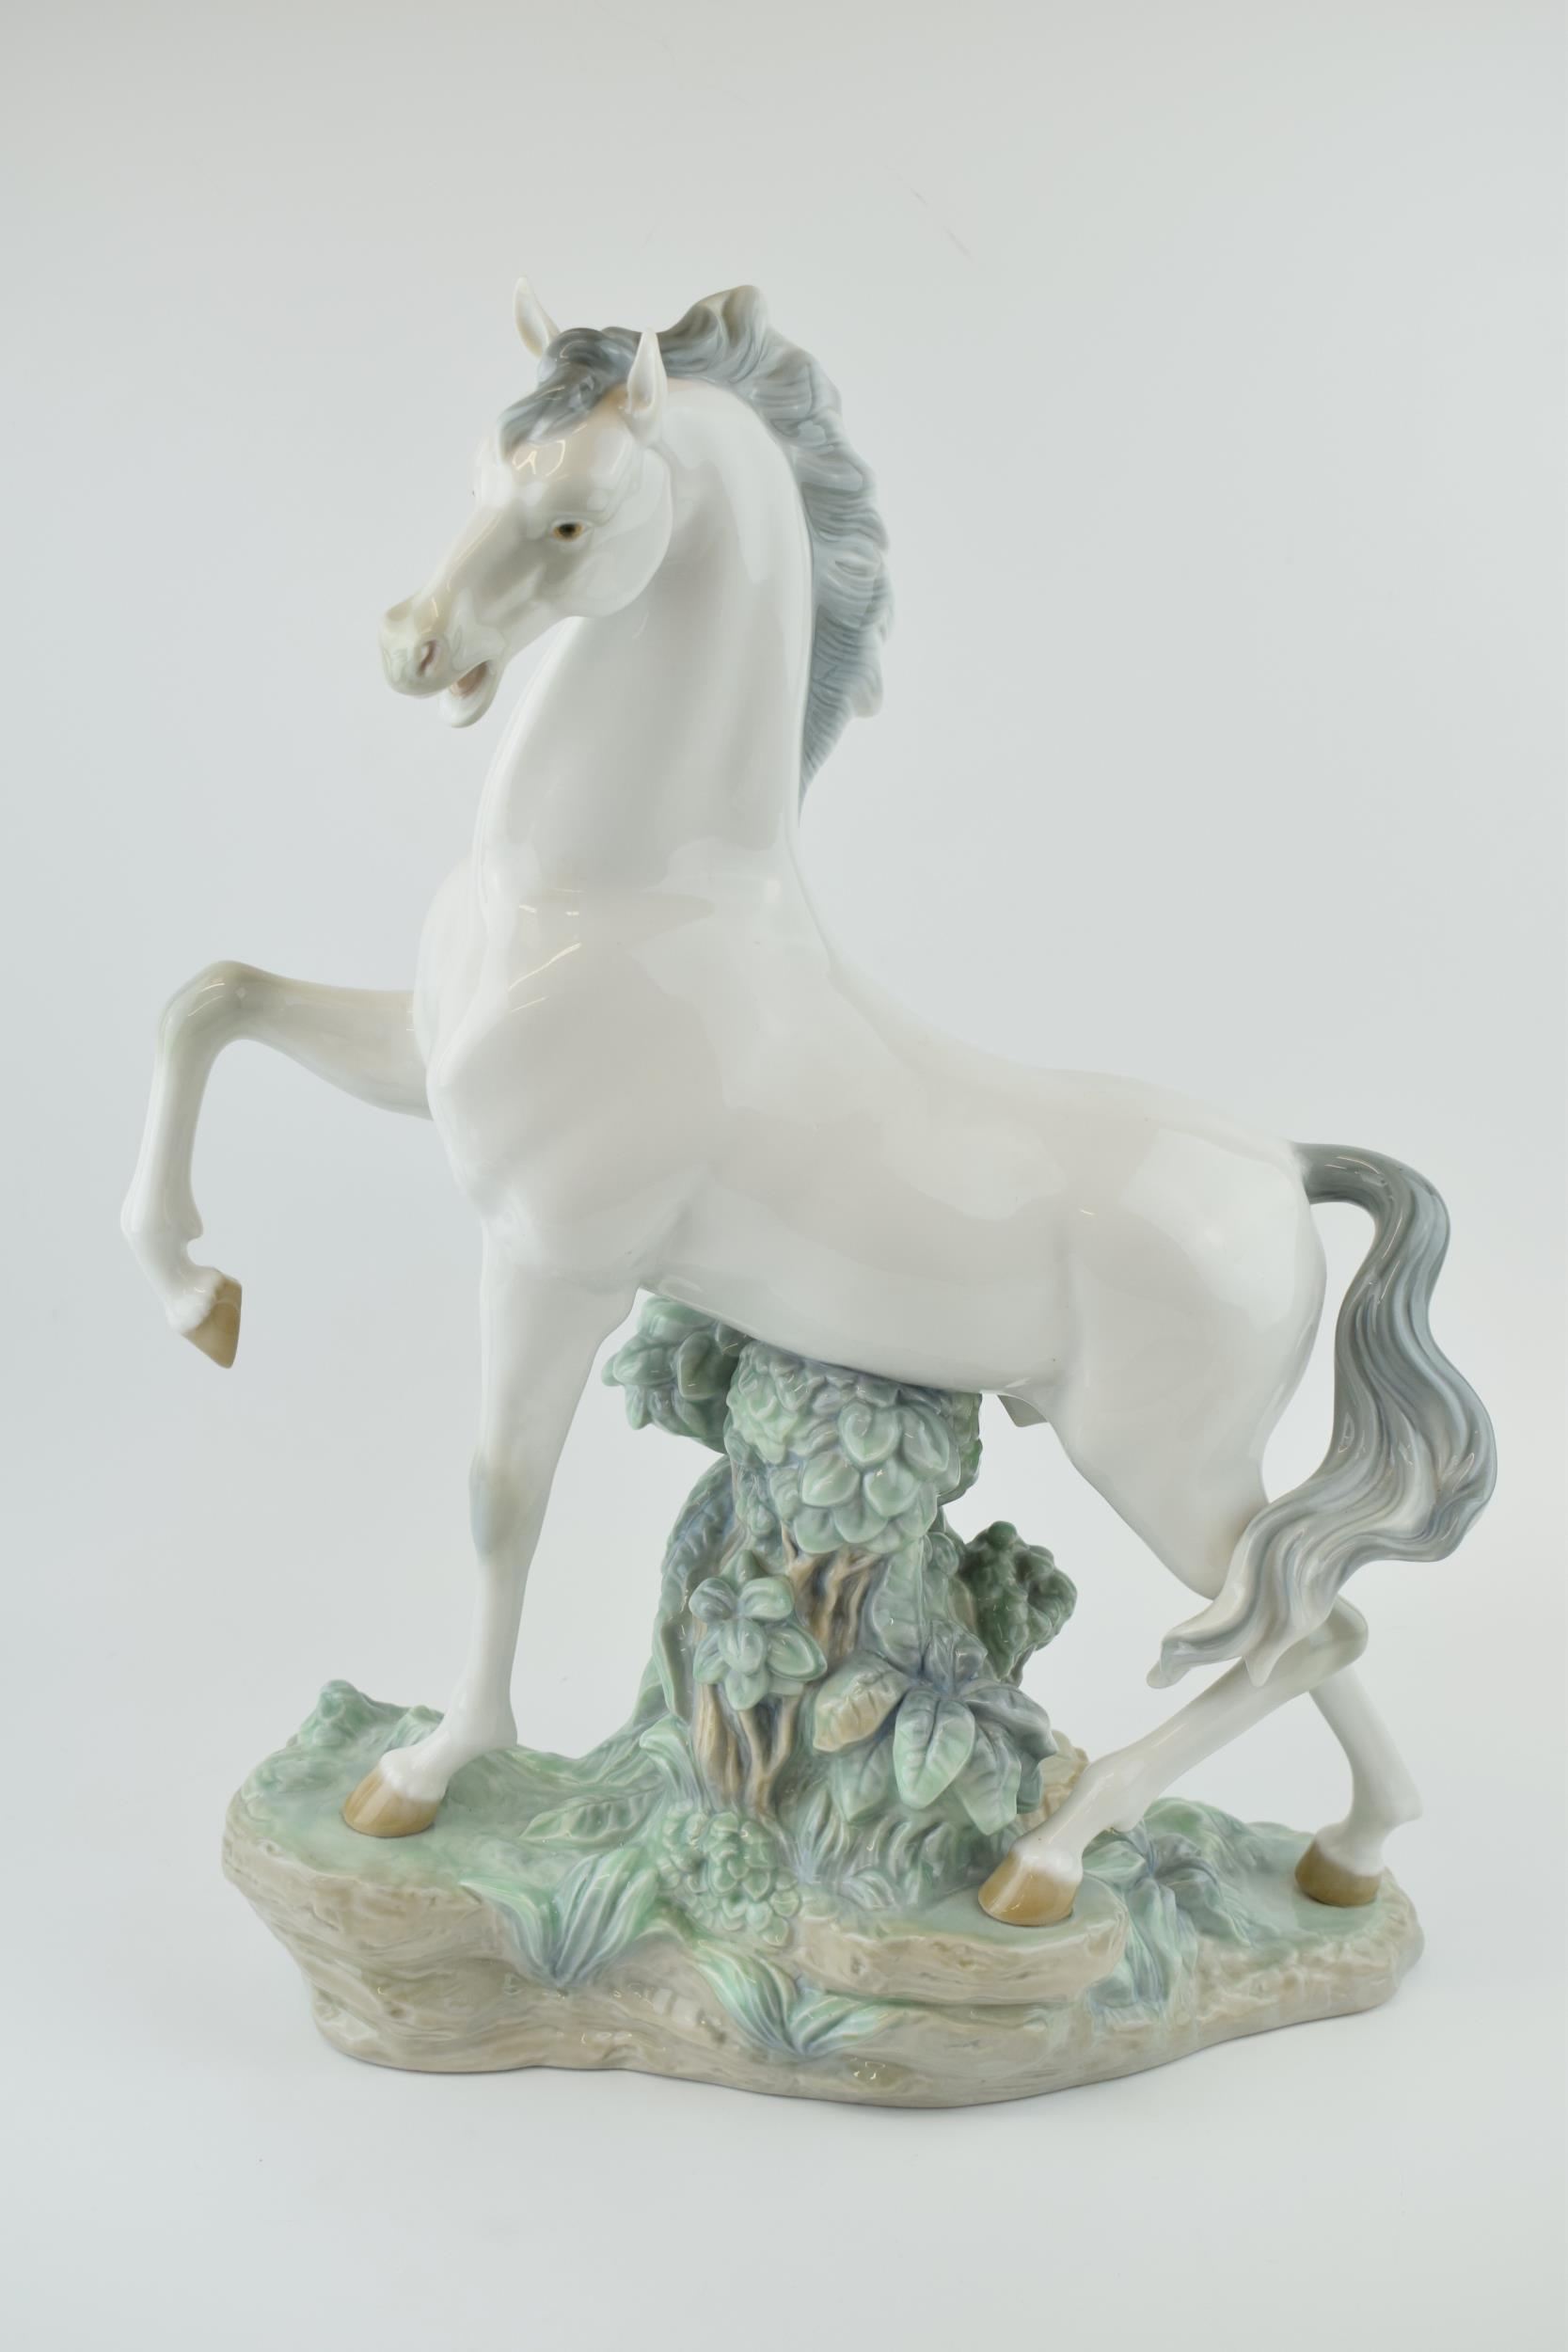 Large Lladro horse figure 'Caballo Arrogante' 4781, 44cm tall. In good condition with no obvious - Image 2 of 5